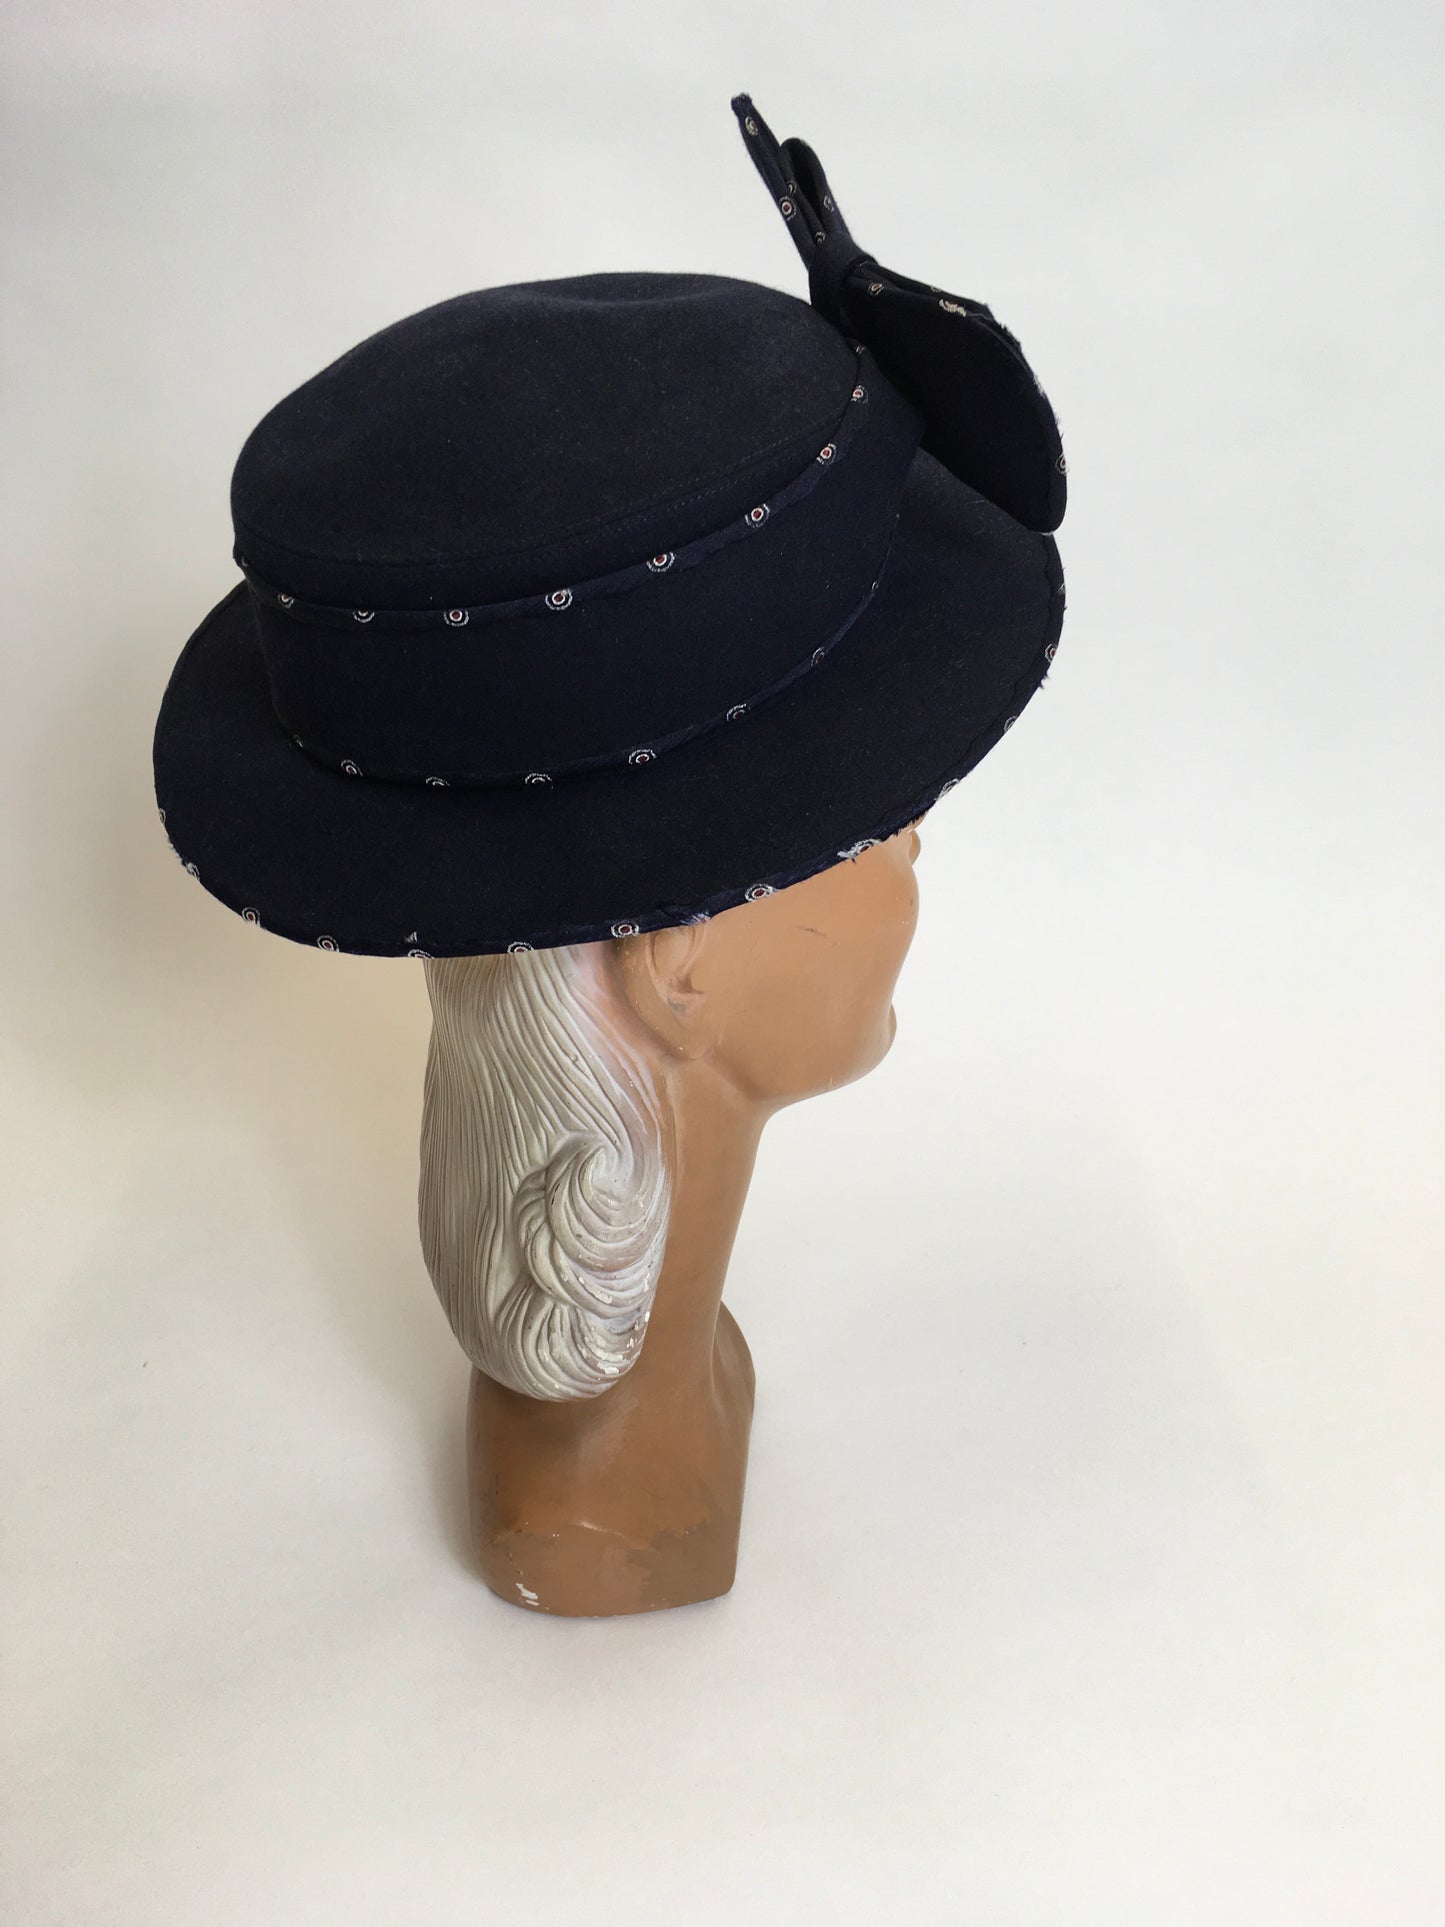 Original late 1930’s Marshall & Snelgrove Hat - Huge Bow Adornment with Fabric Trim